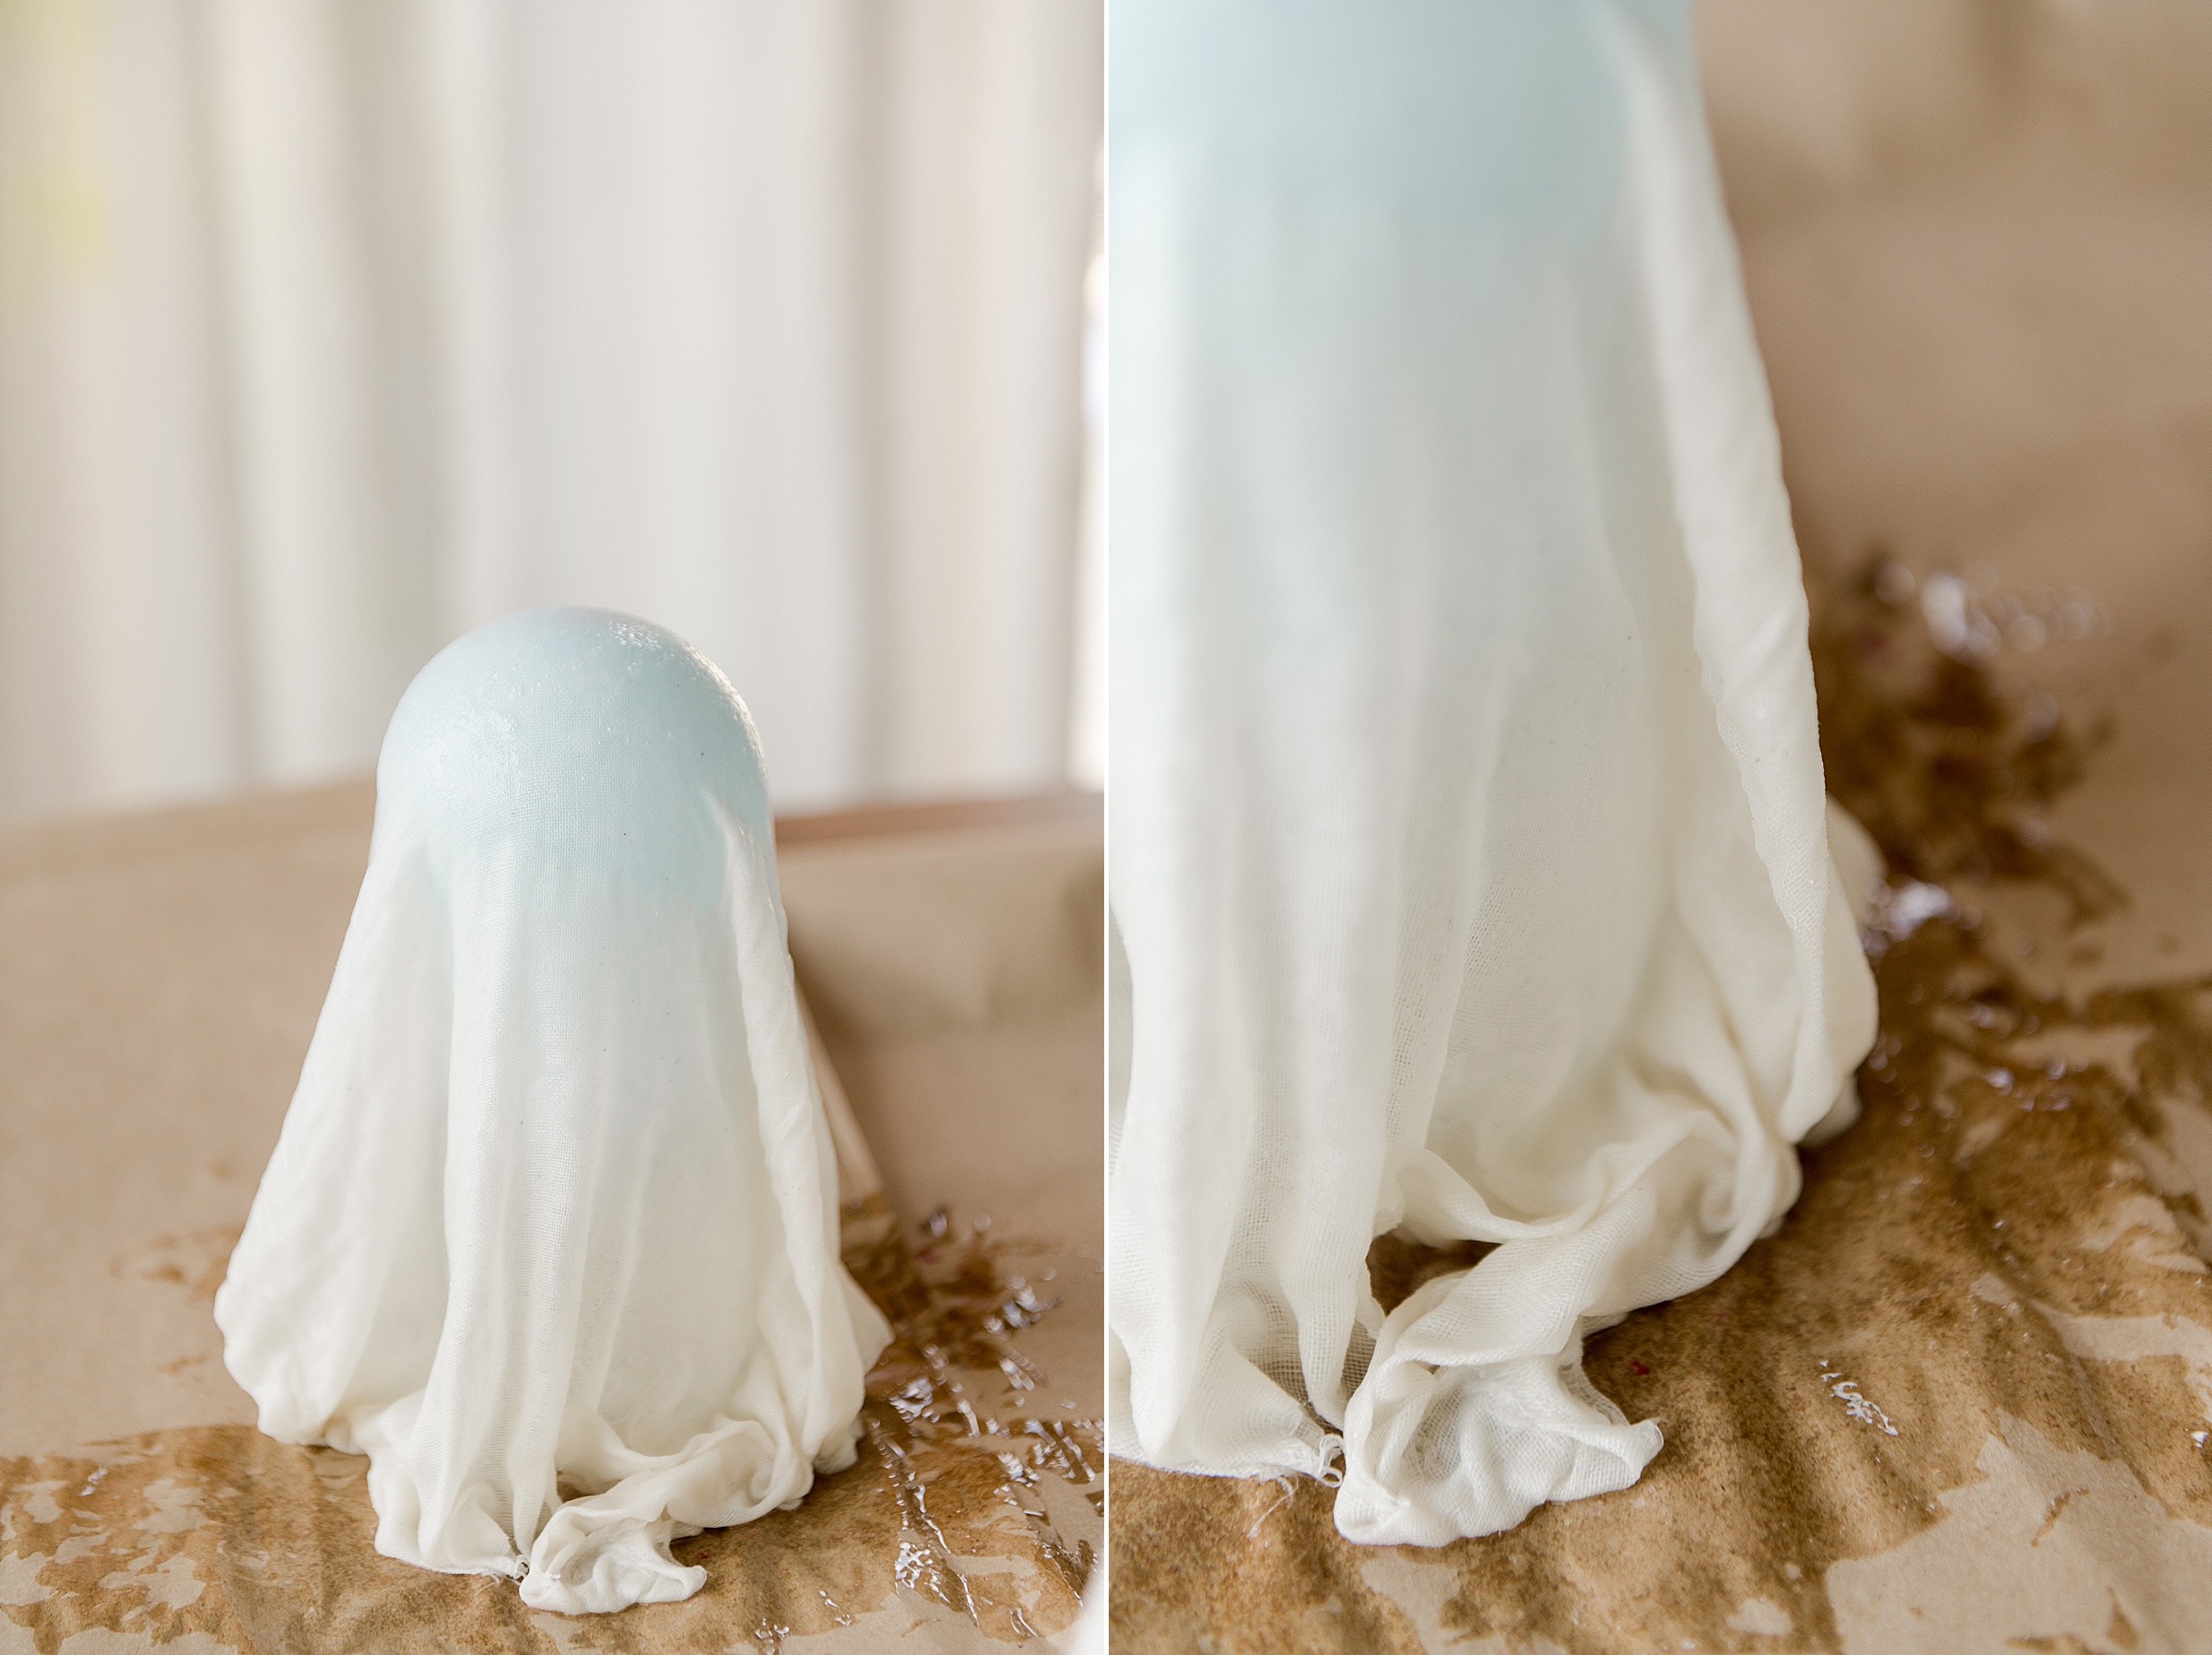 How to make cheesecloth ghosts, cheesecloth ghost DIY, how to make cheesecloth ghosts with glue, glue to make cheesecloth ghosts, handmade cheesecloth ghosts